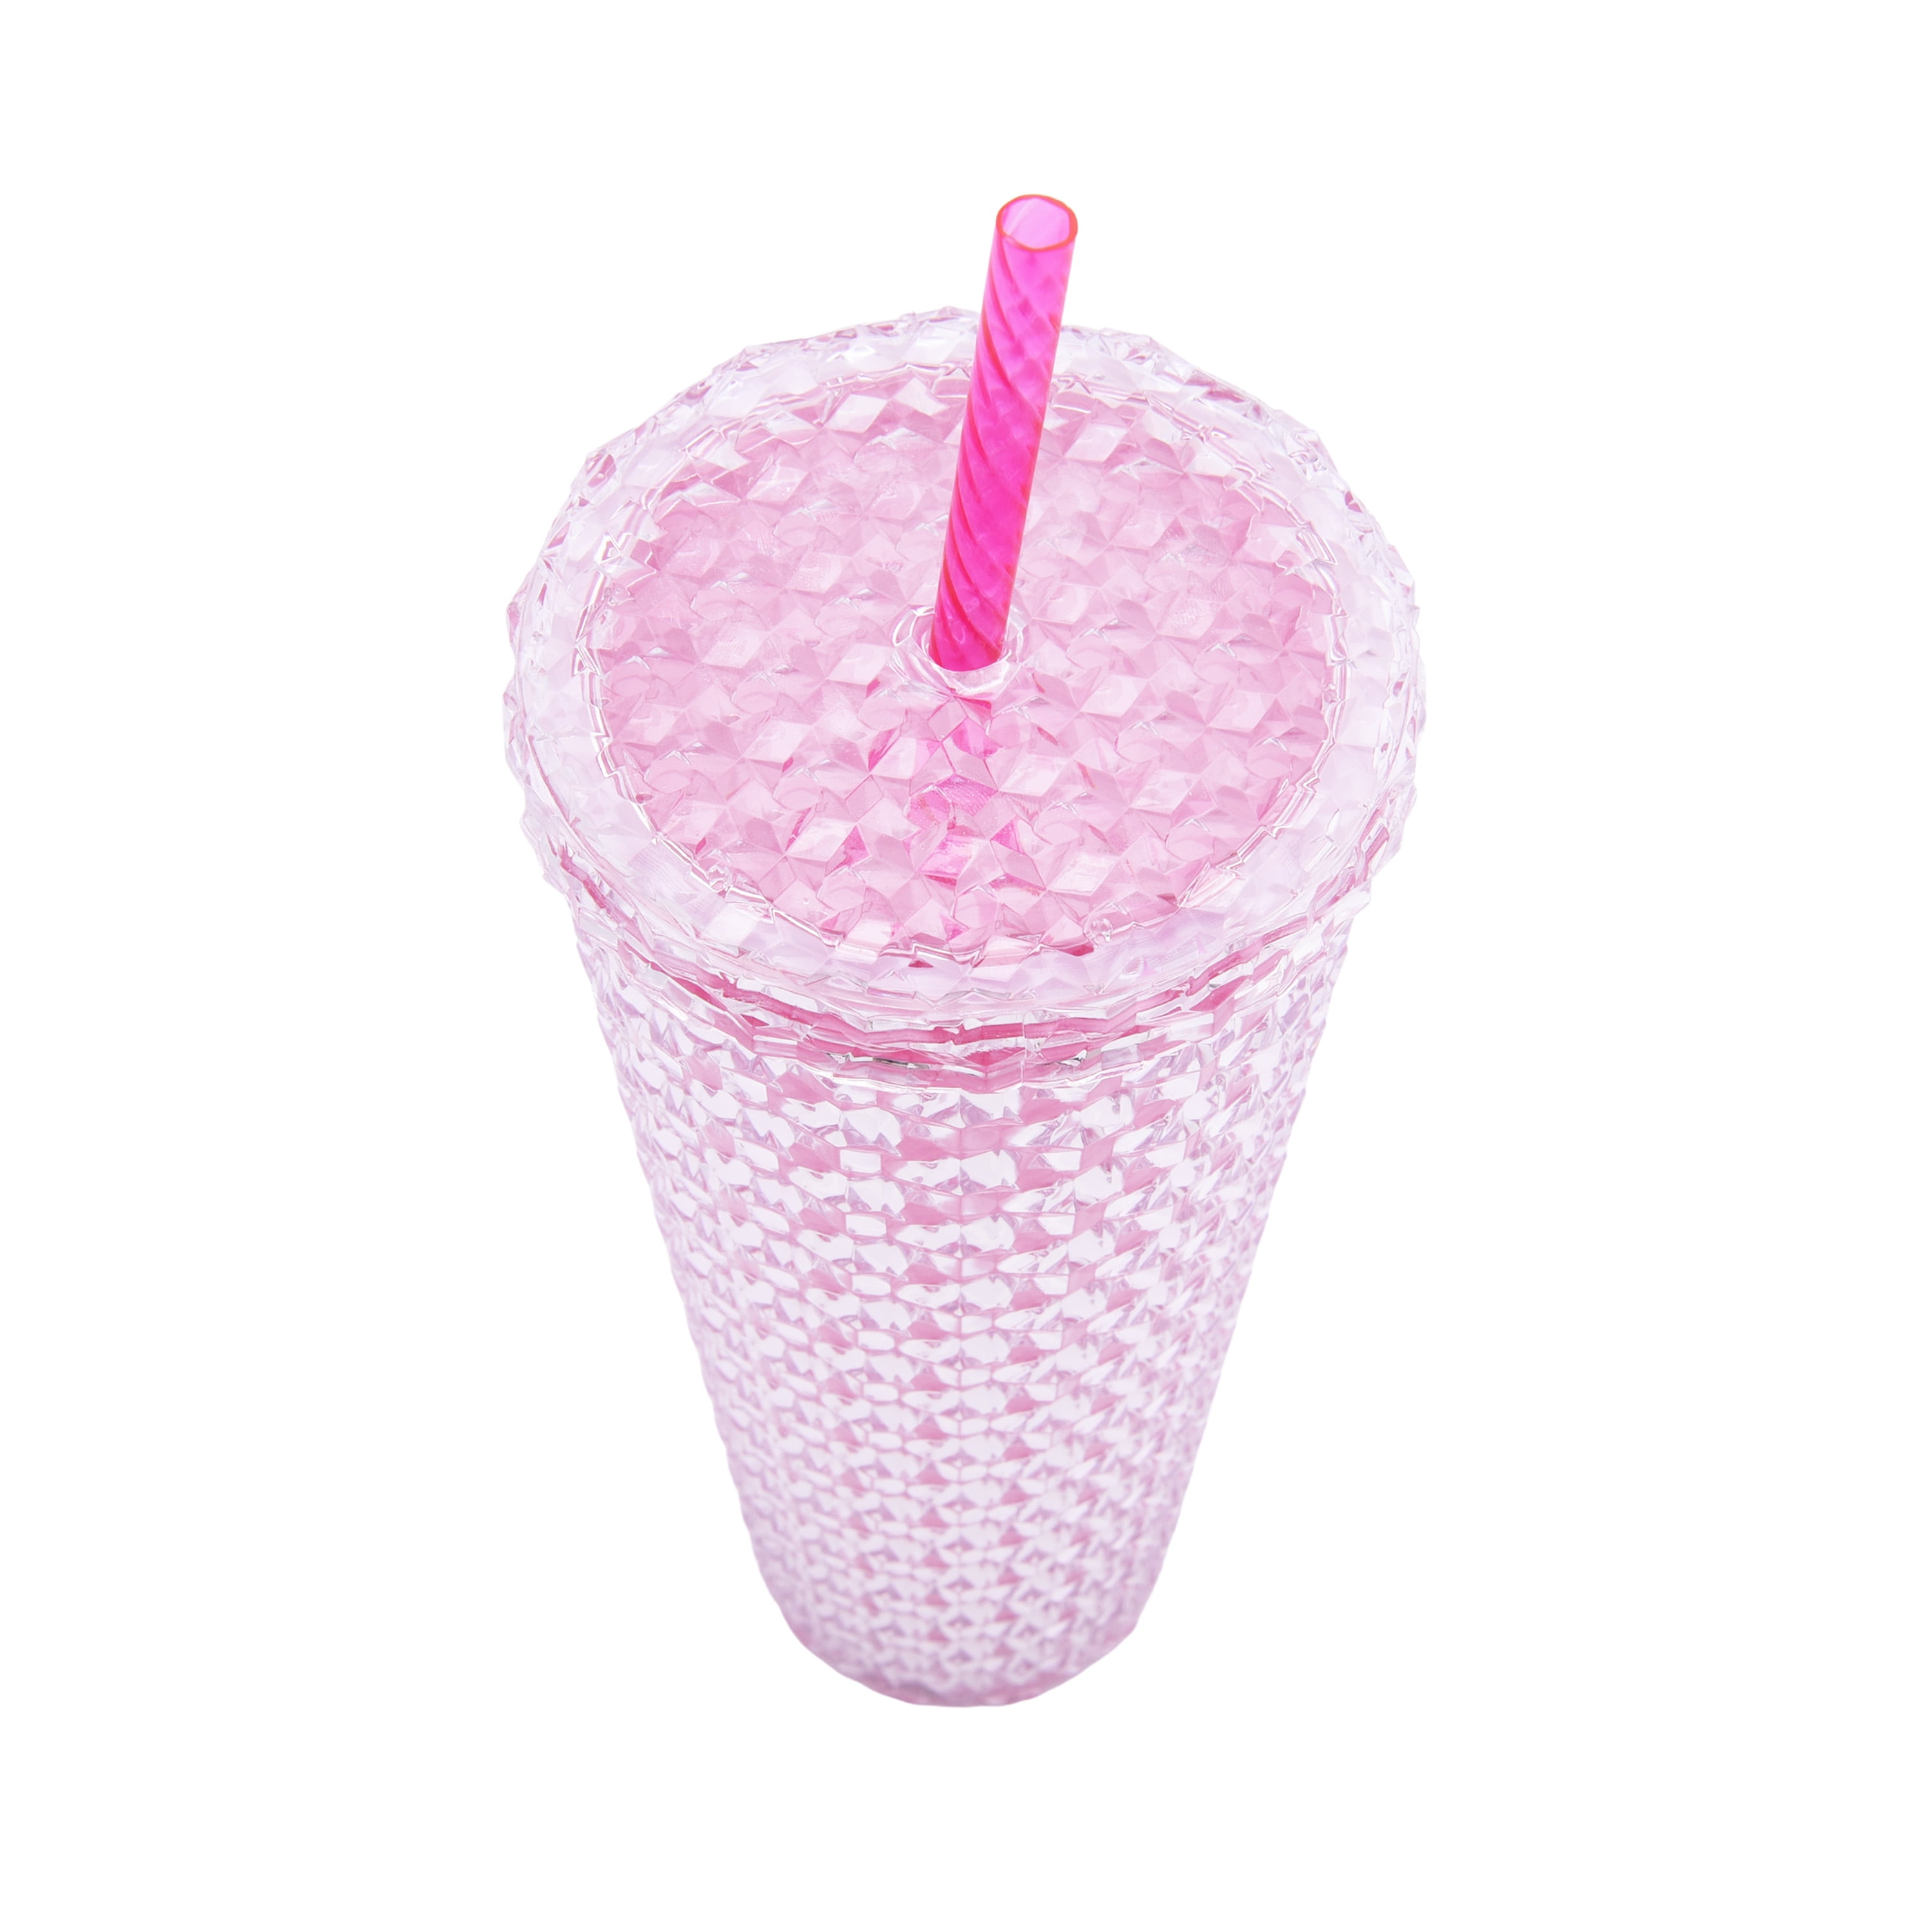 Pink And Green Meany 40 oz. Tumbler with Handle – Mayan Sub Shop